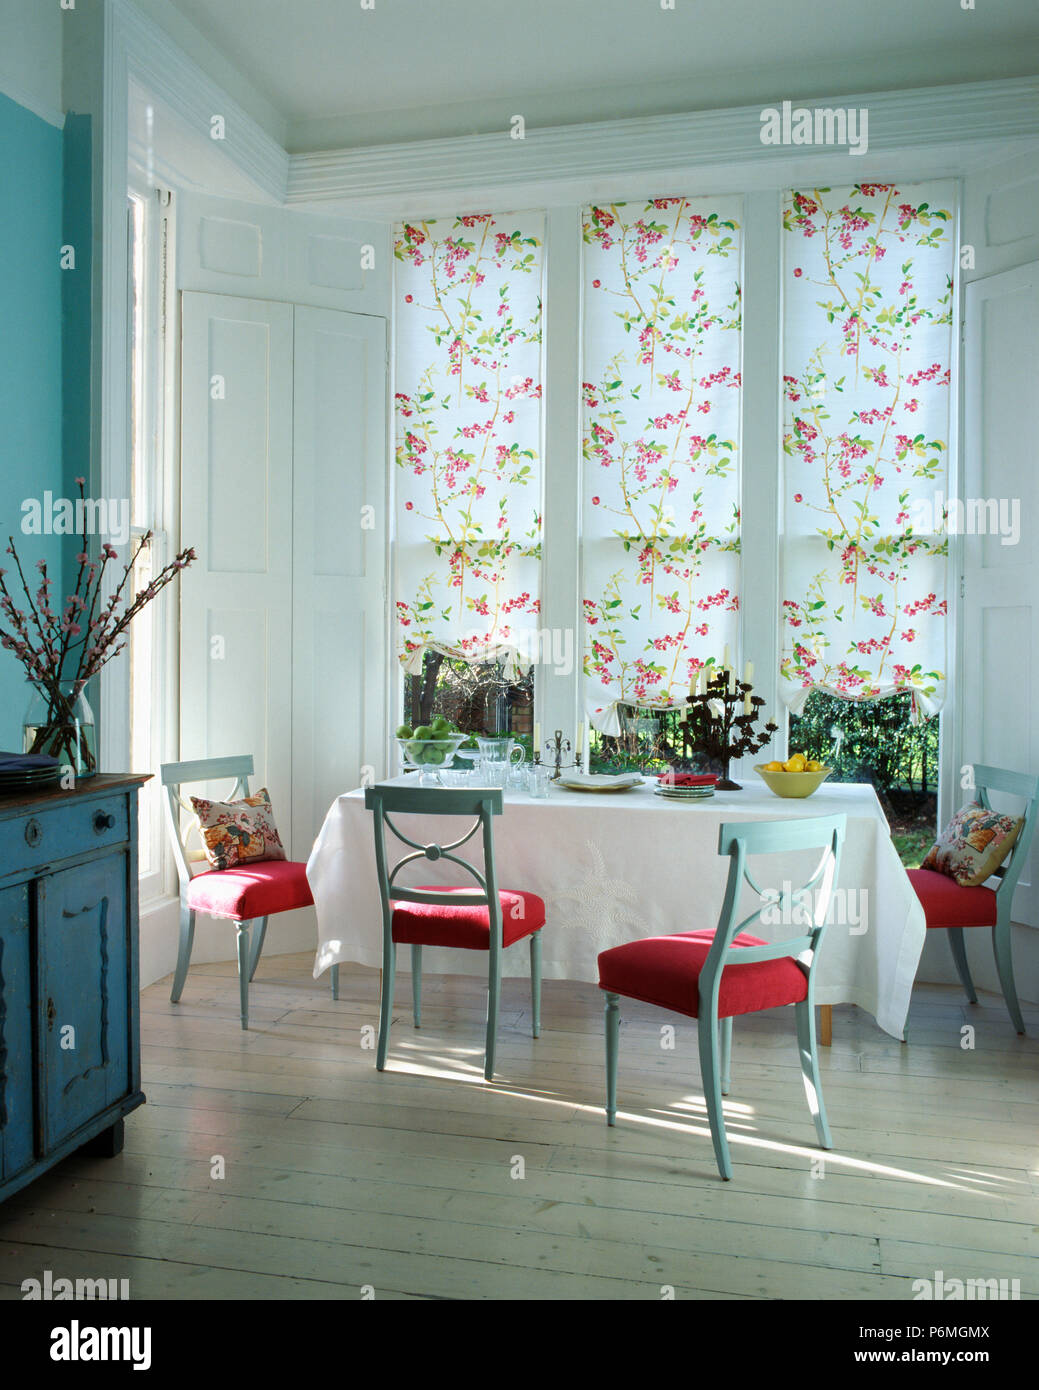 Floral Blind On Large Window In Dining Room With Wooden Flooring And Red Seated Chairs At Table With Crisp White Cloth Stock Photo Alamy